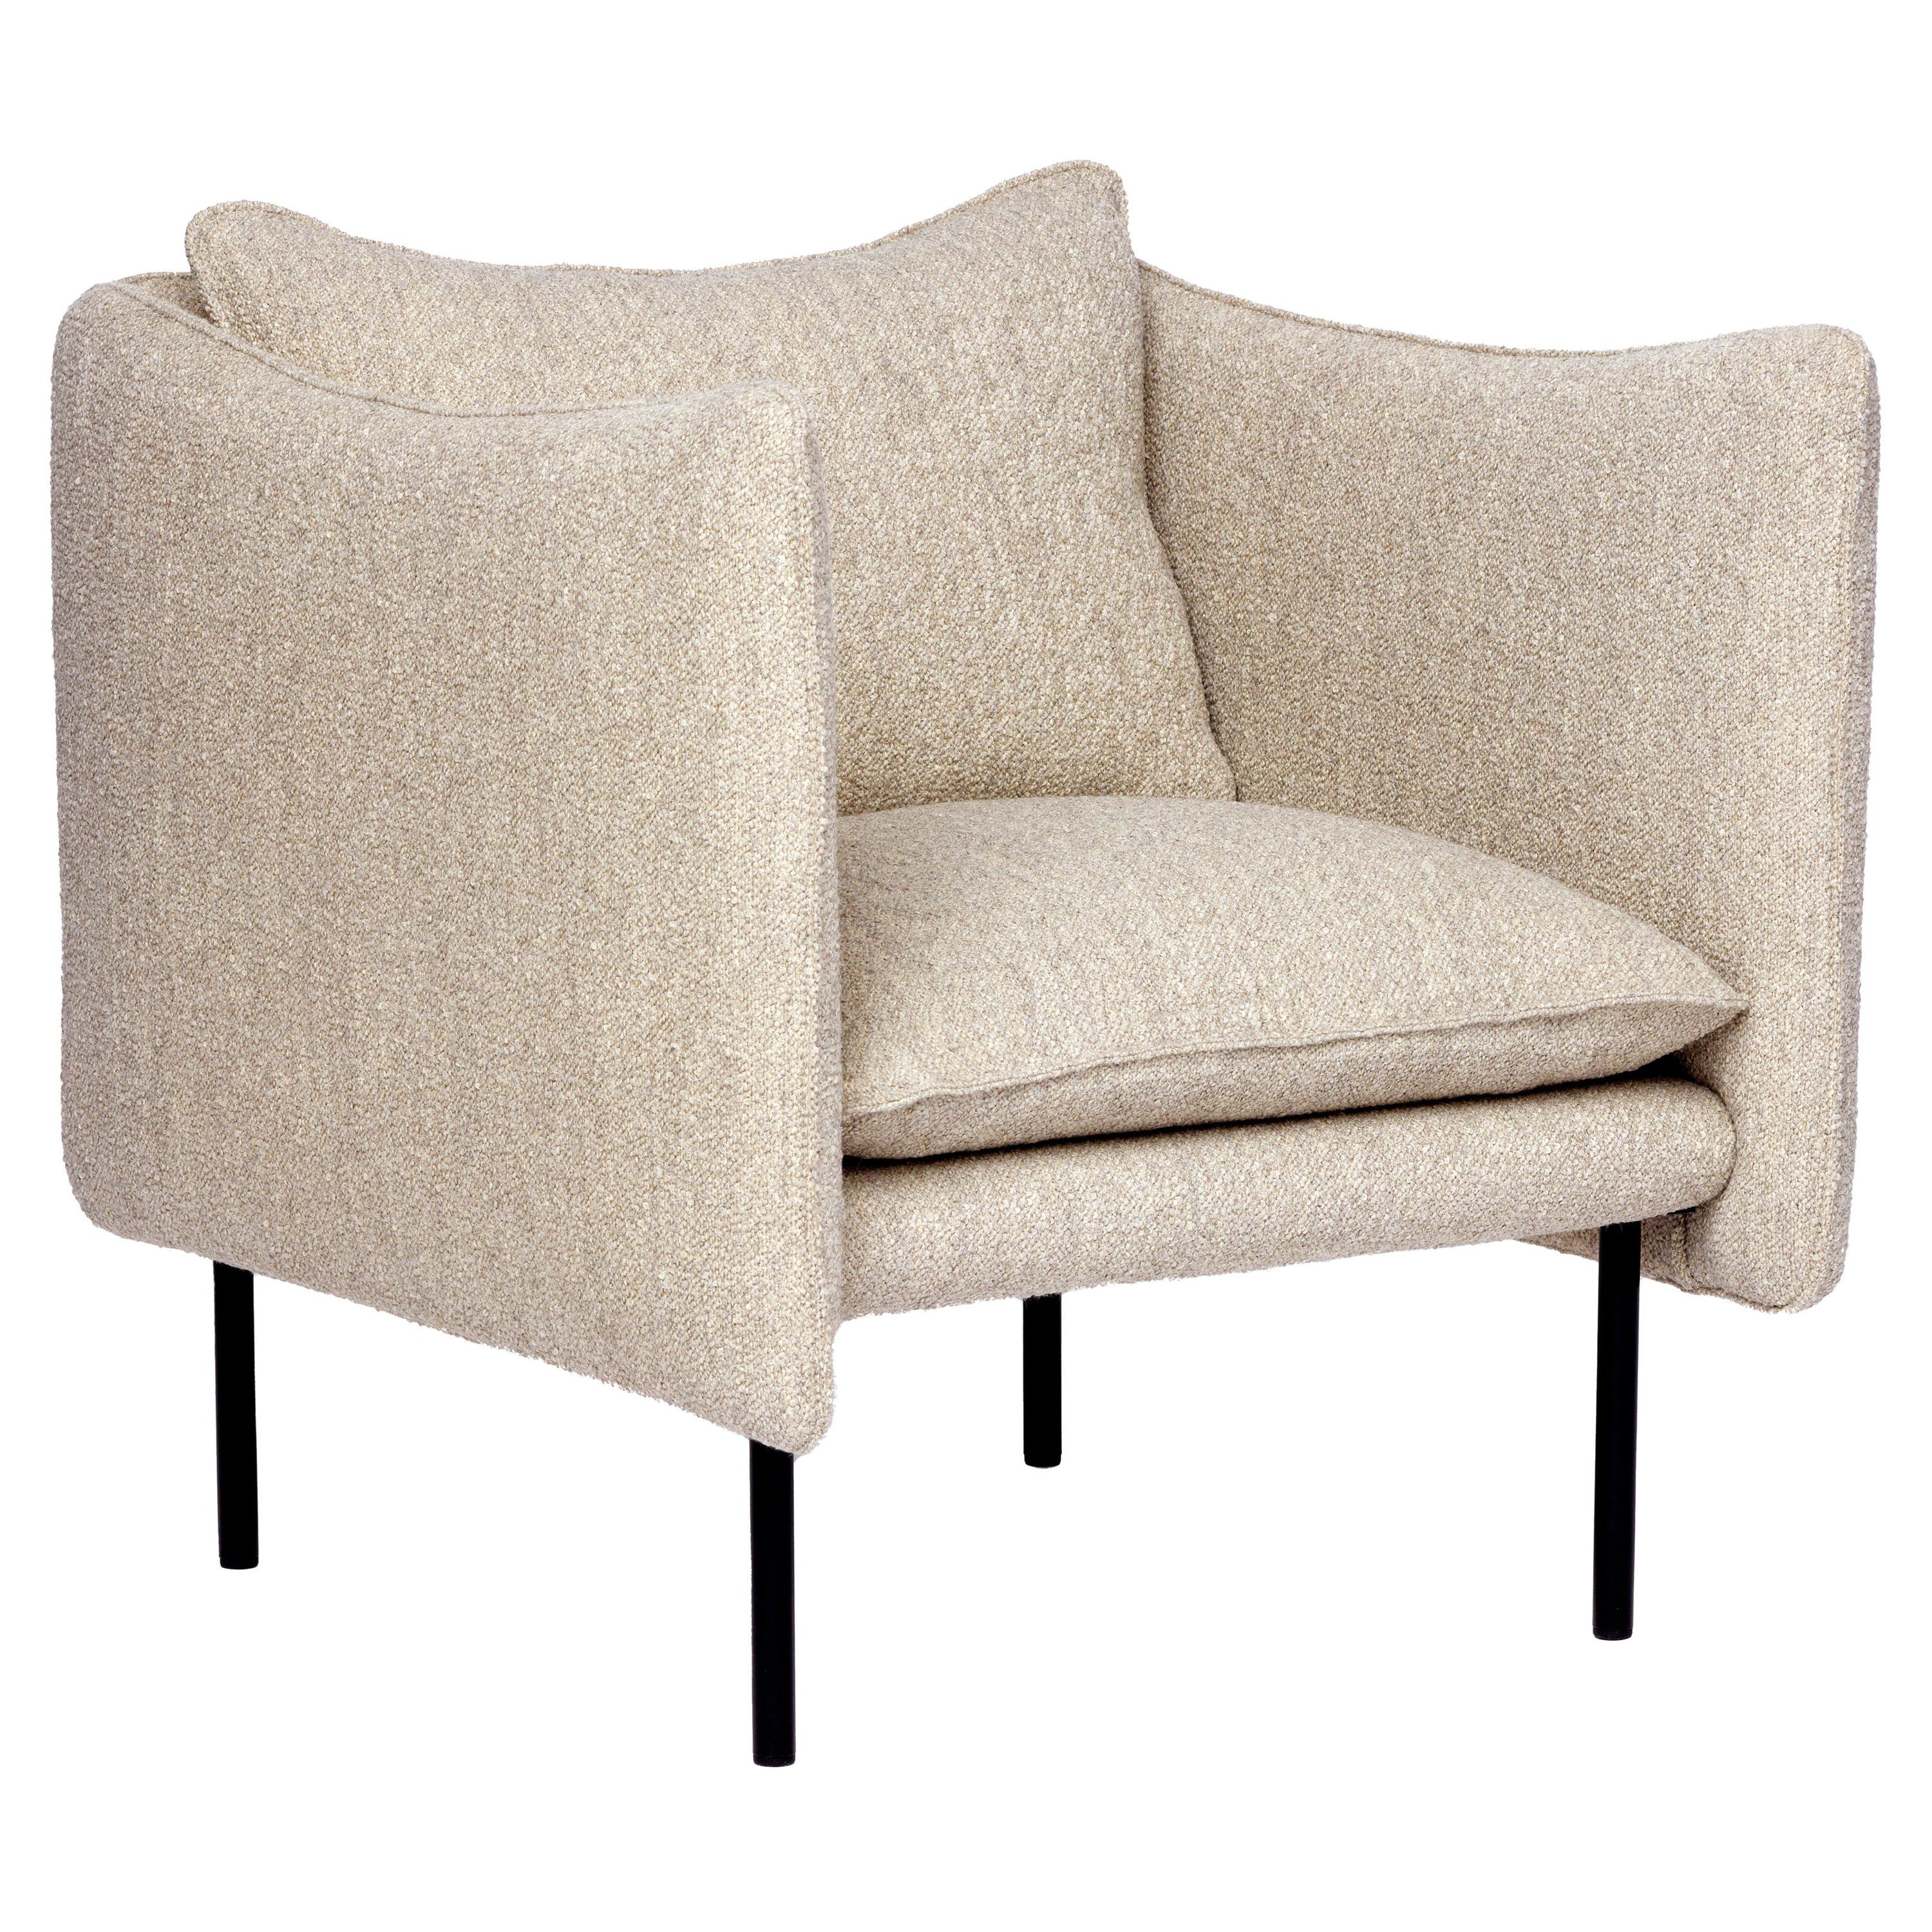 Contemporary Armchair 'Tiki' by Fogia, Sand Fabric 